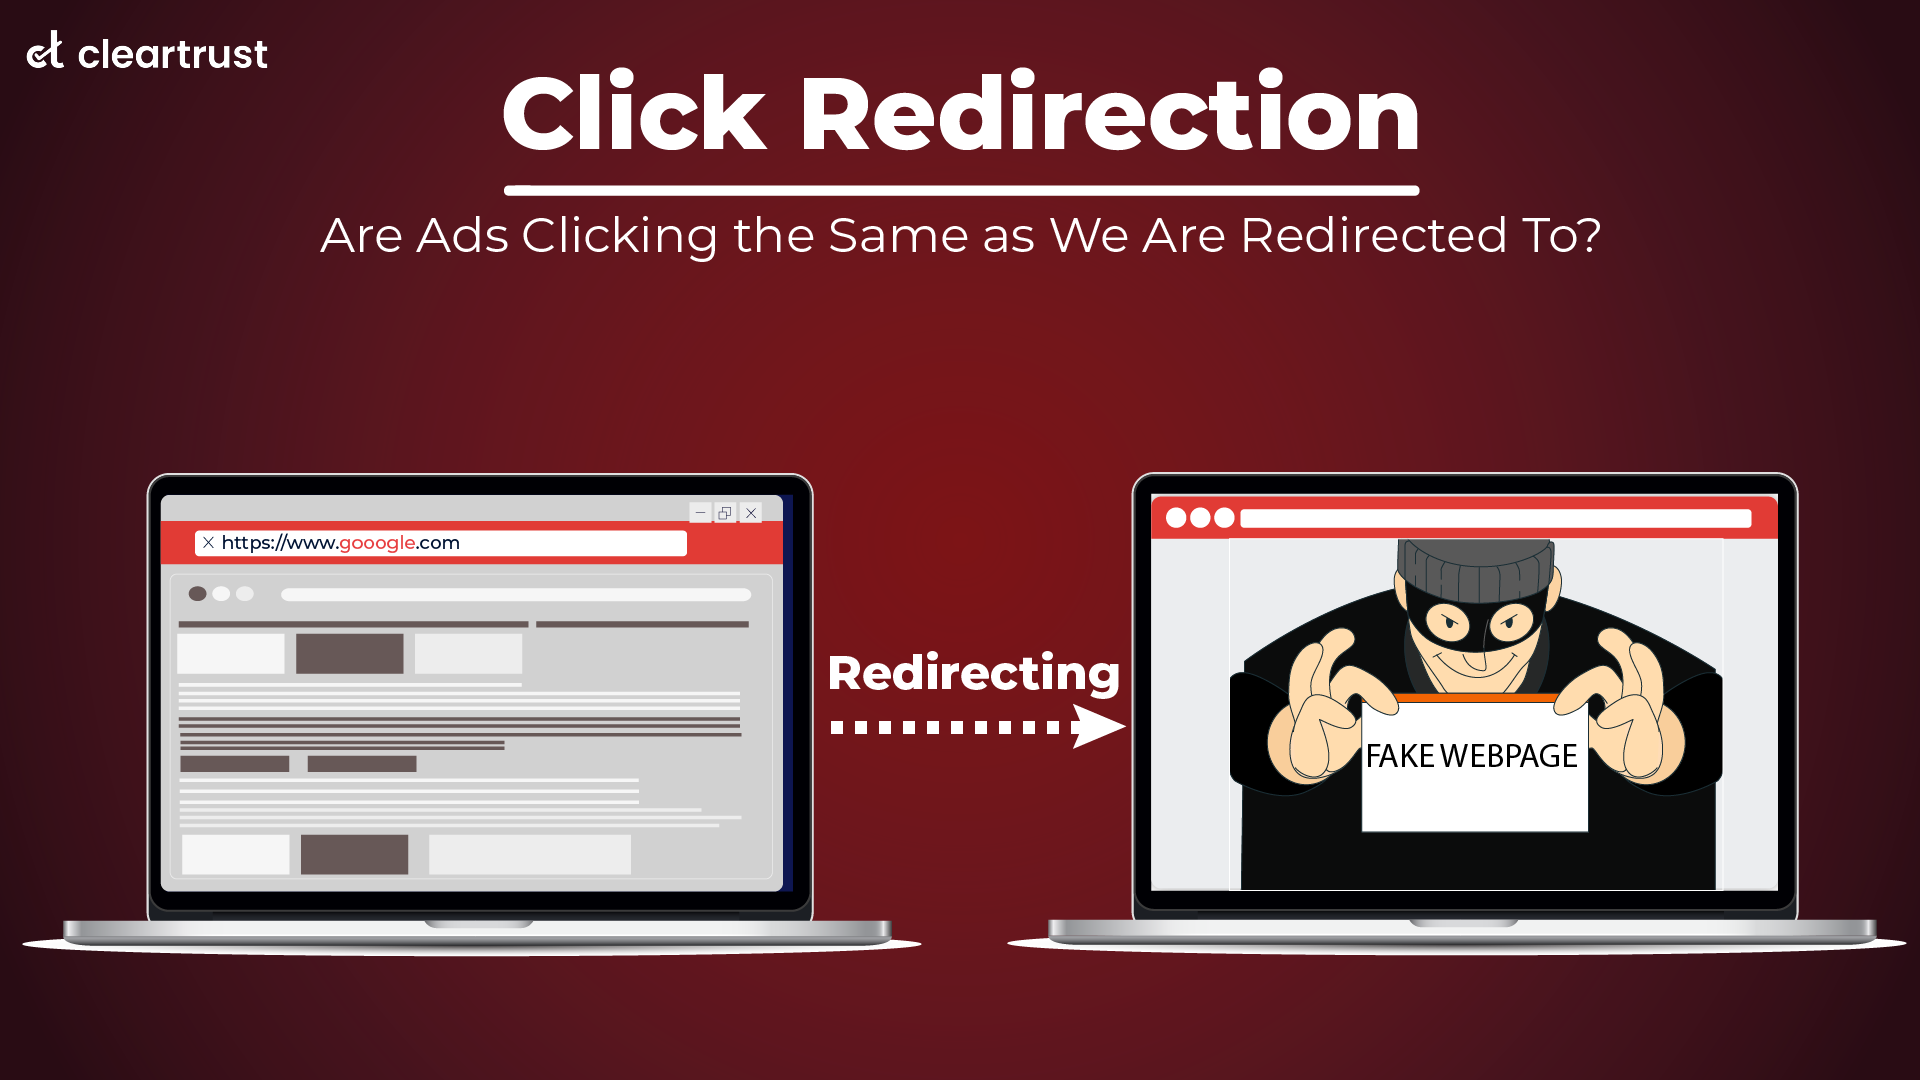 Click redirection - Are ads clicking the same as we are redirected to?